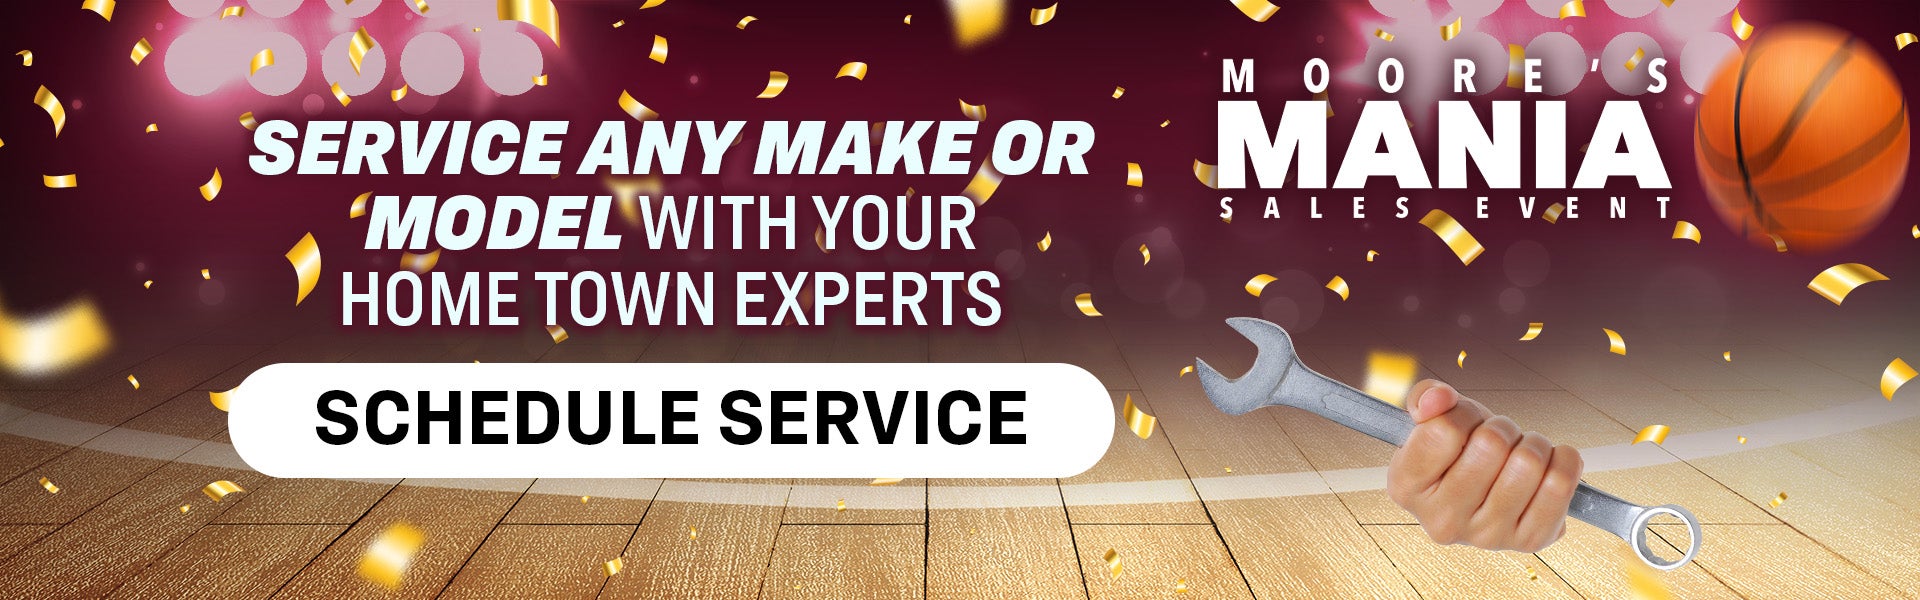 Service Any Make or Model with your home town experts